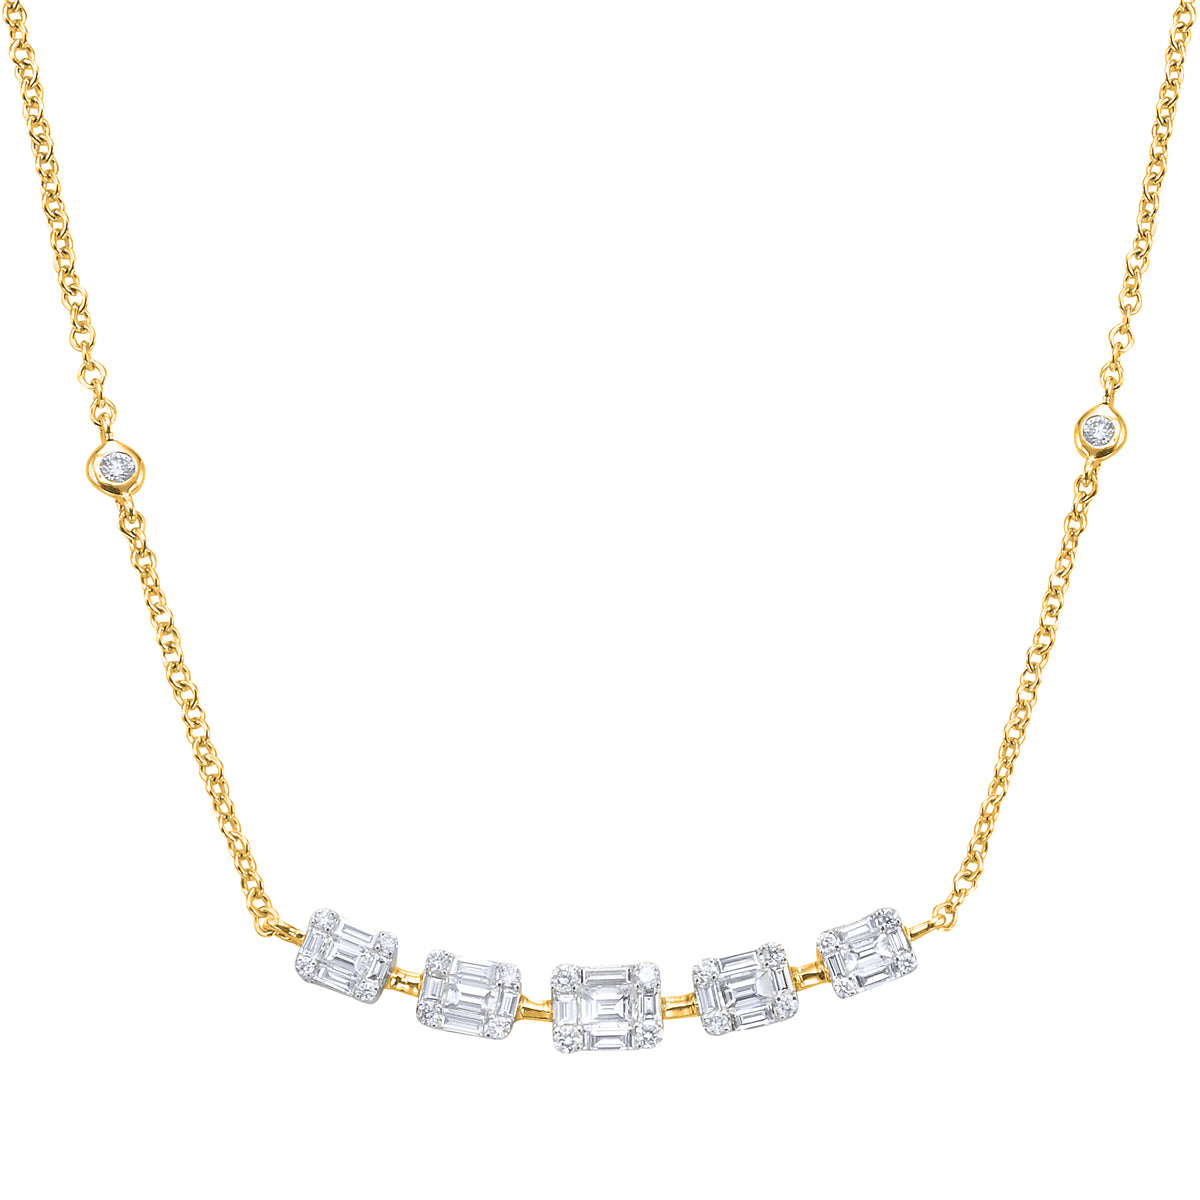 Necklace 18KY/4.89G 25BD-0.73CT 26RD-0.32CT